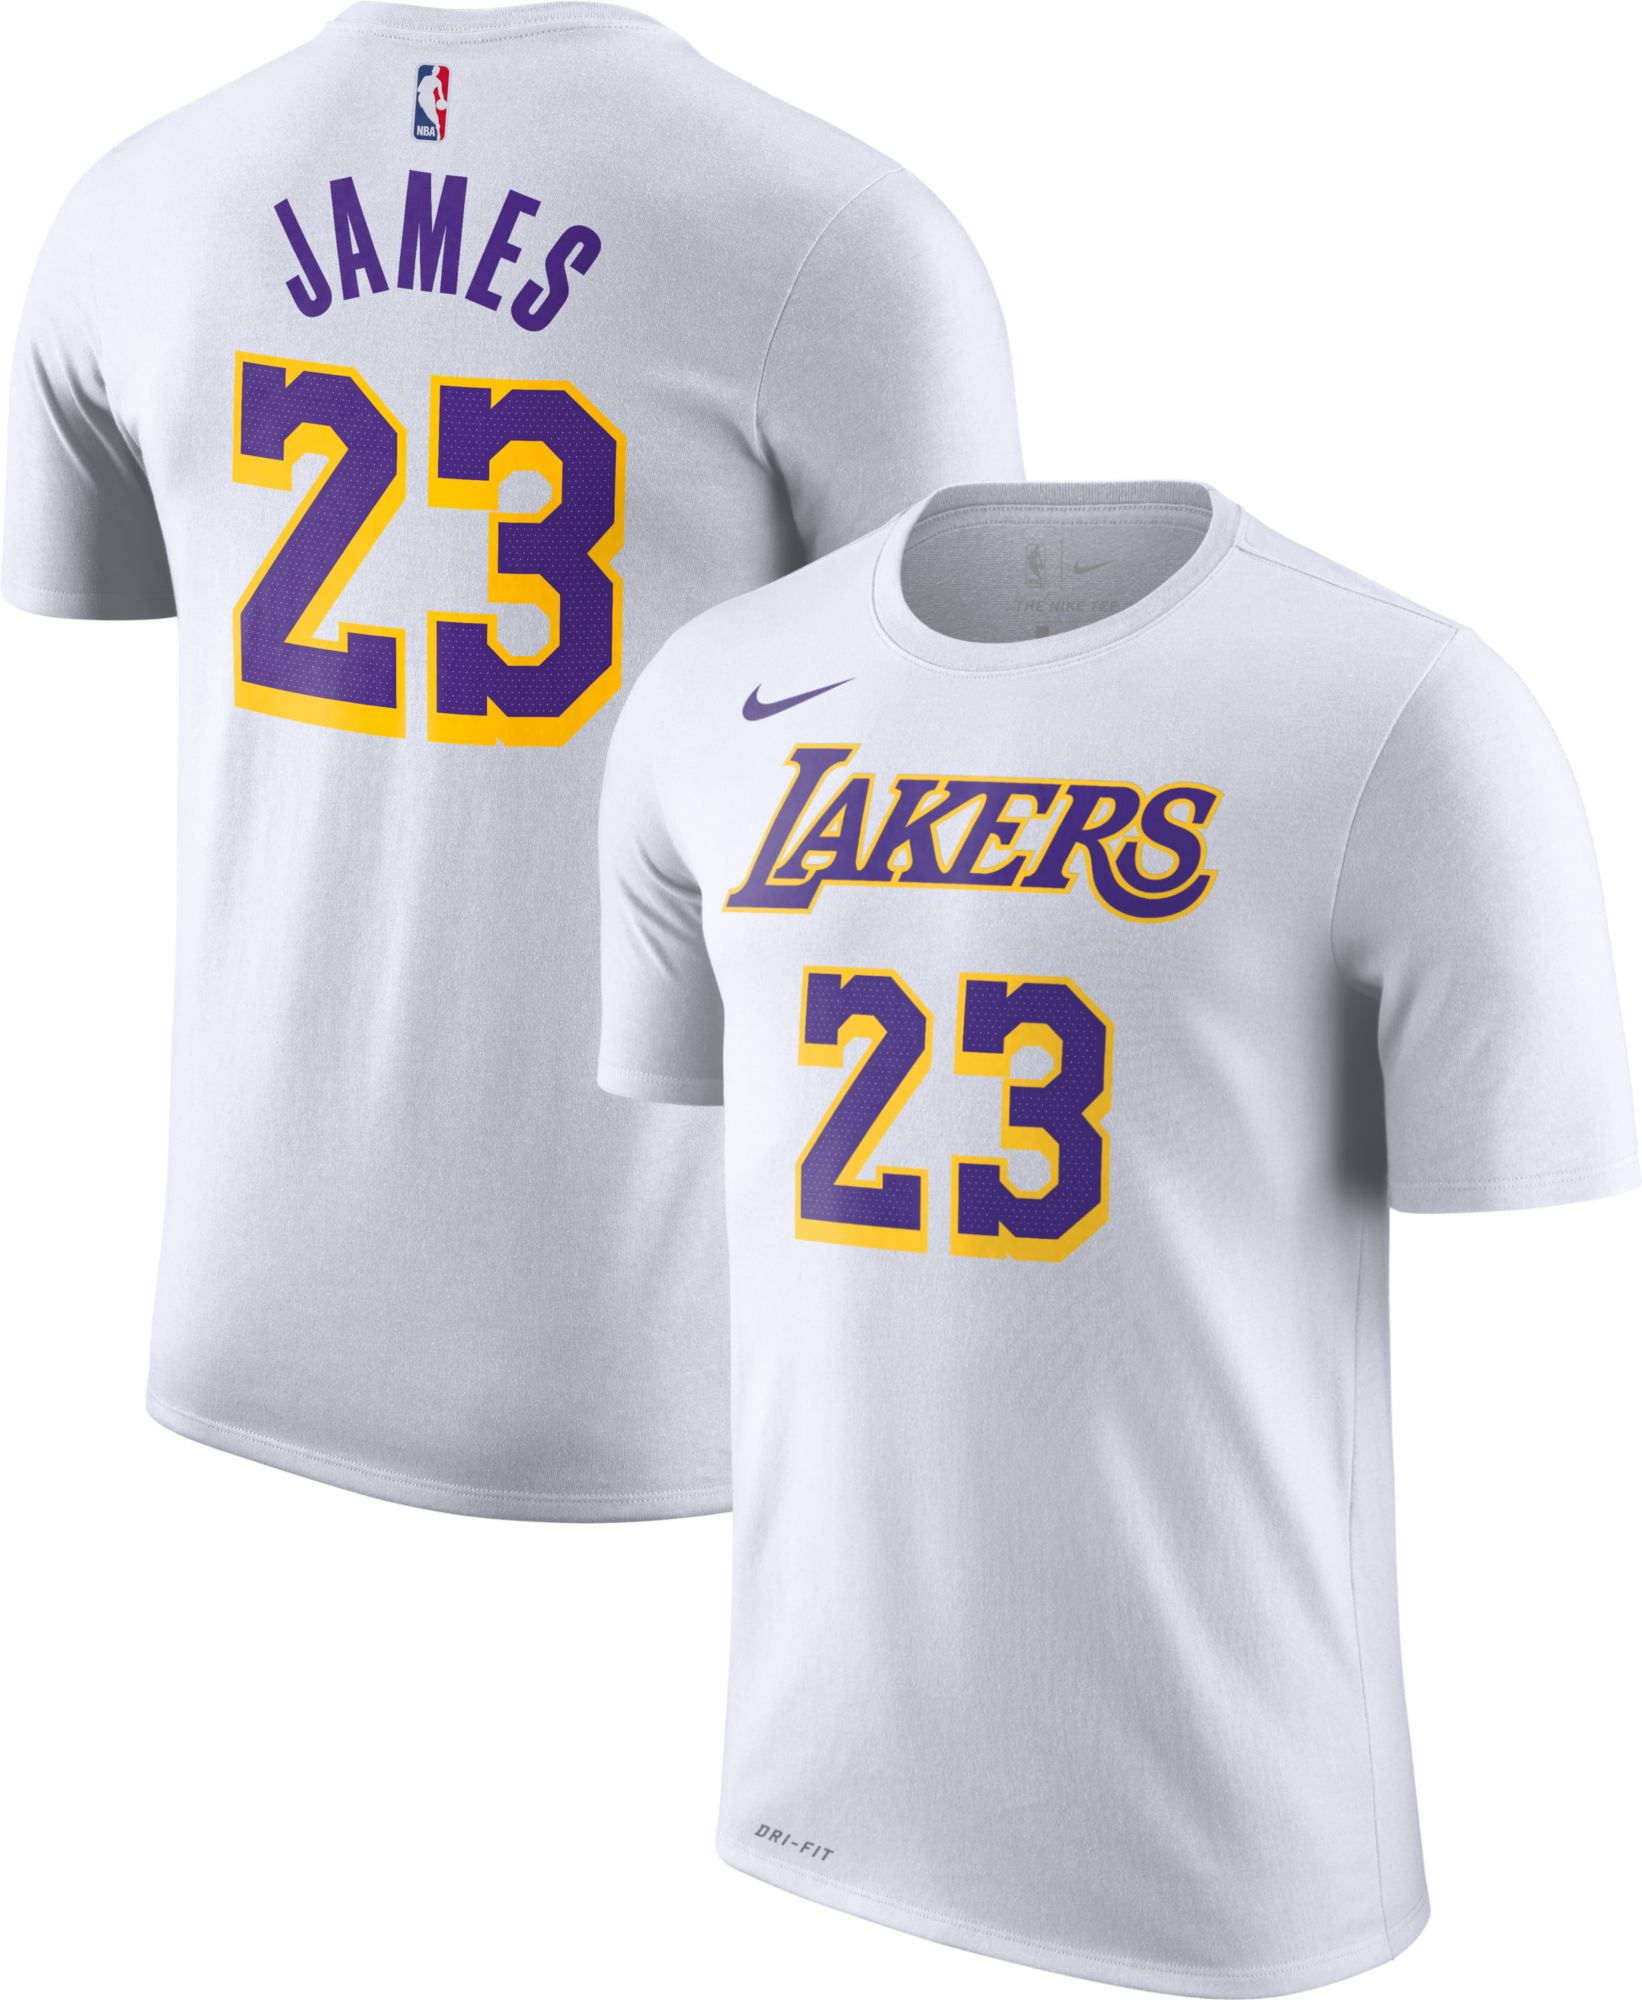 lebron youth jersey lakers